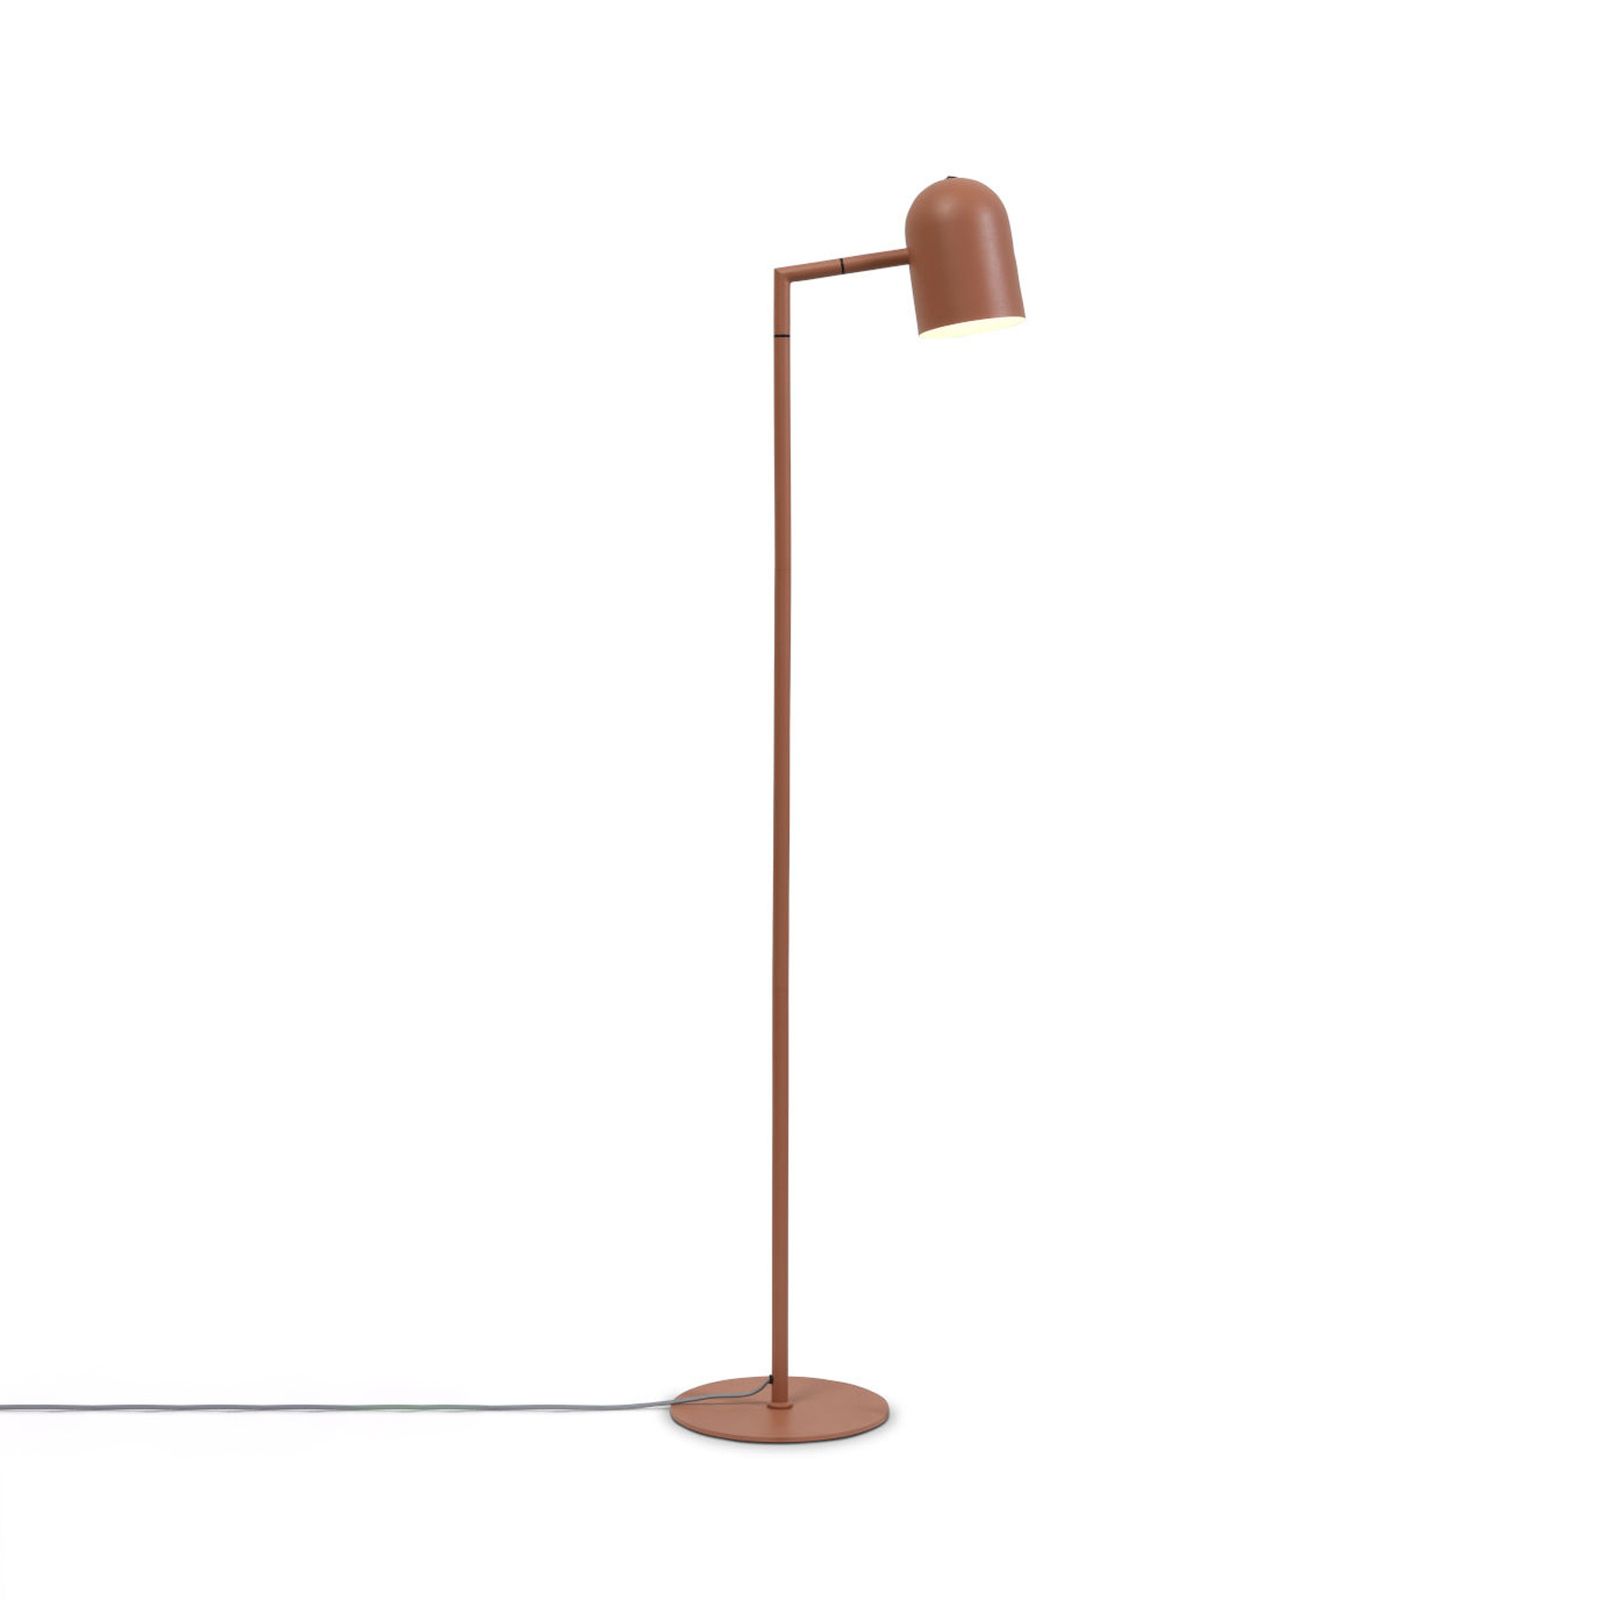 It's about RoMi Marseille lampe pied, terracotta